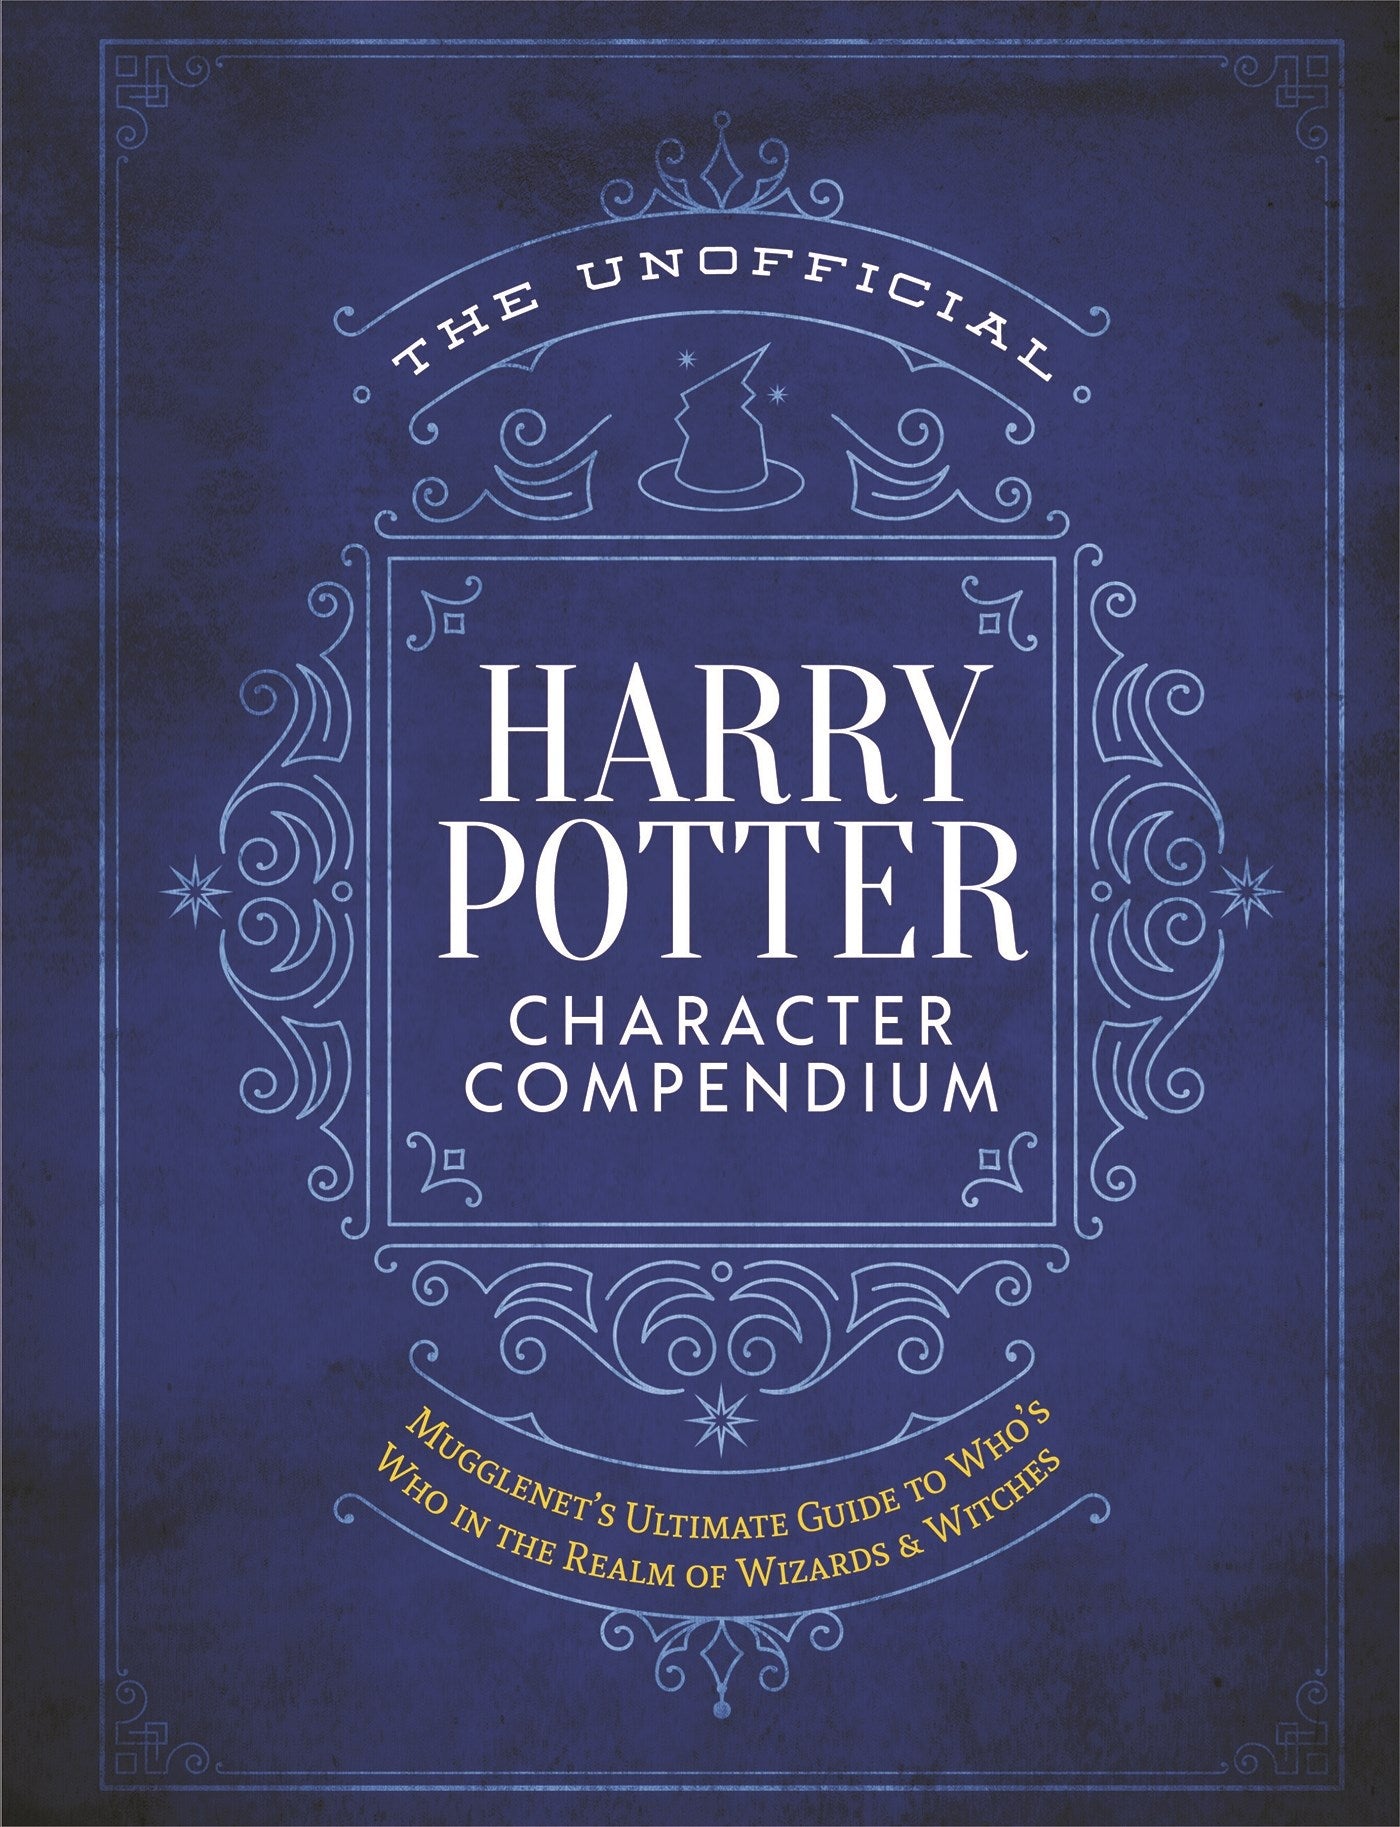 The Unofficial Harry Potter Character Compendium: MuggleNet's Ultimate Guide to Who's Who in the Realm of Wizards and Witches